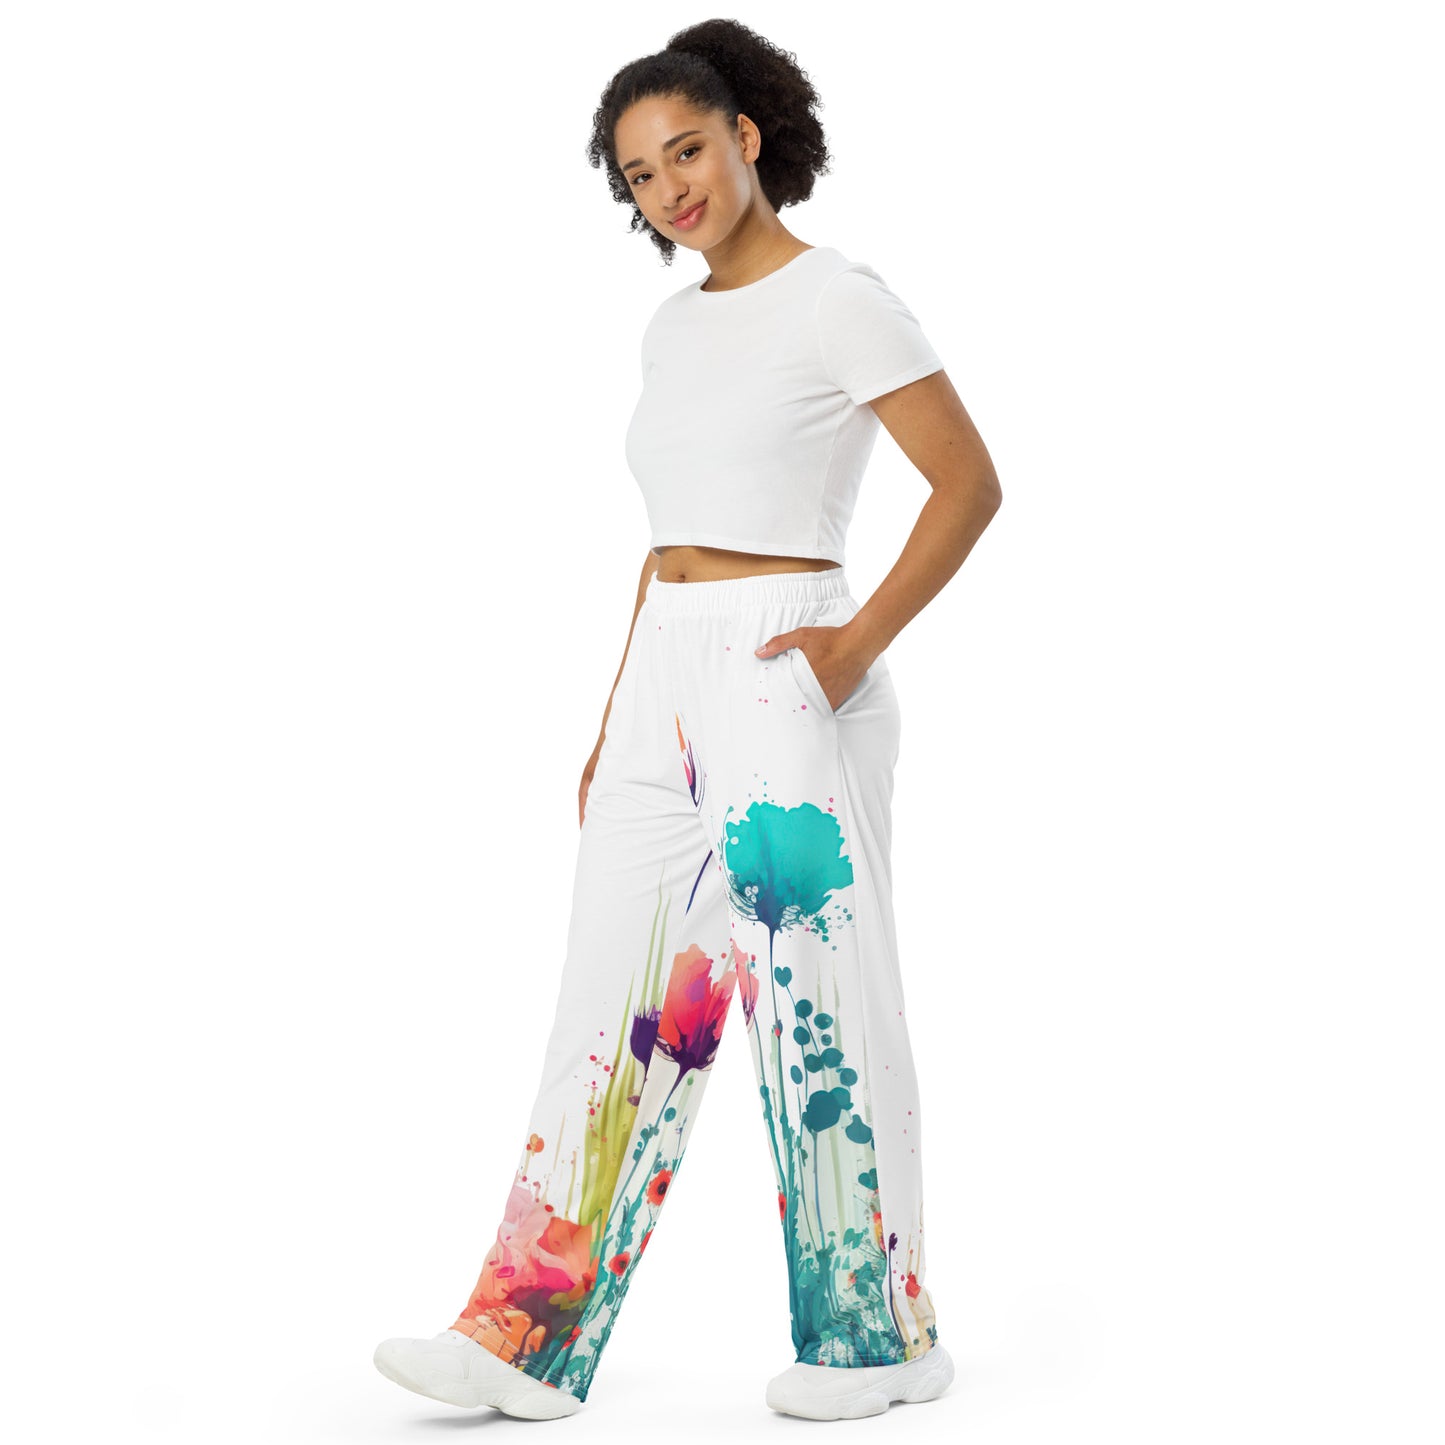 Women's "Ready For Spring" Pant - clothing